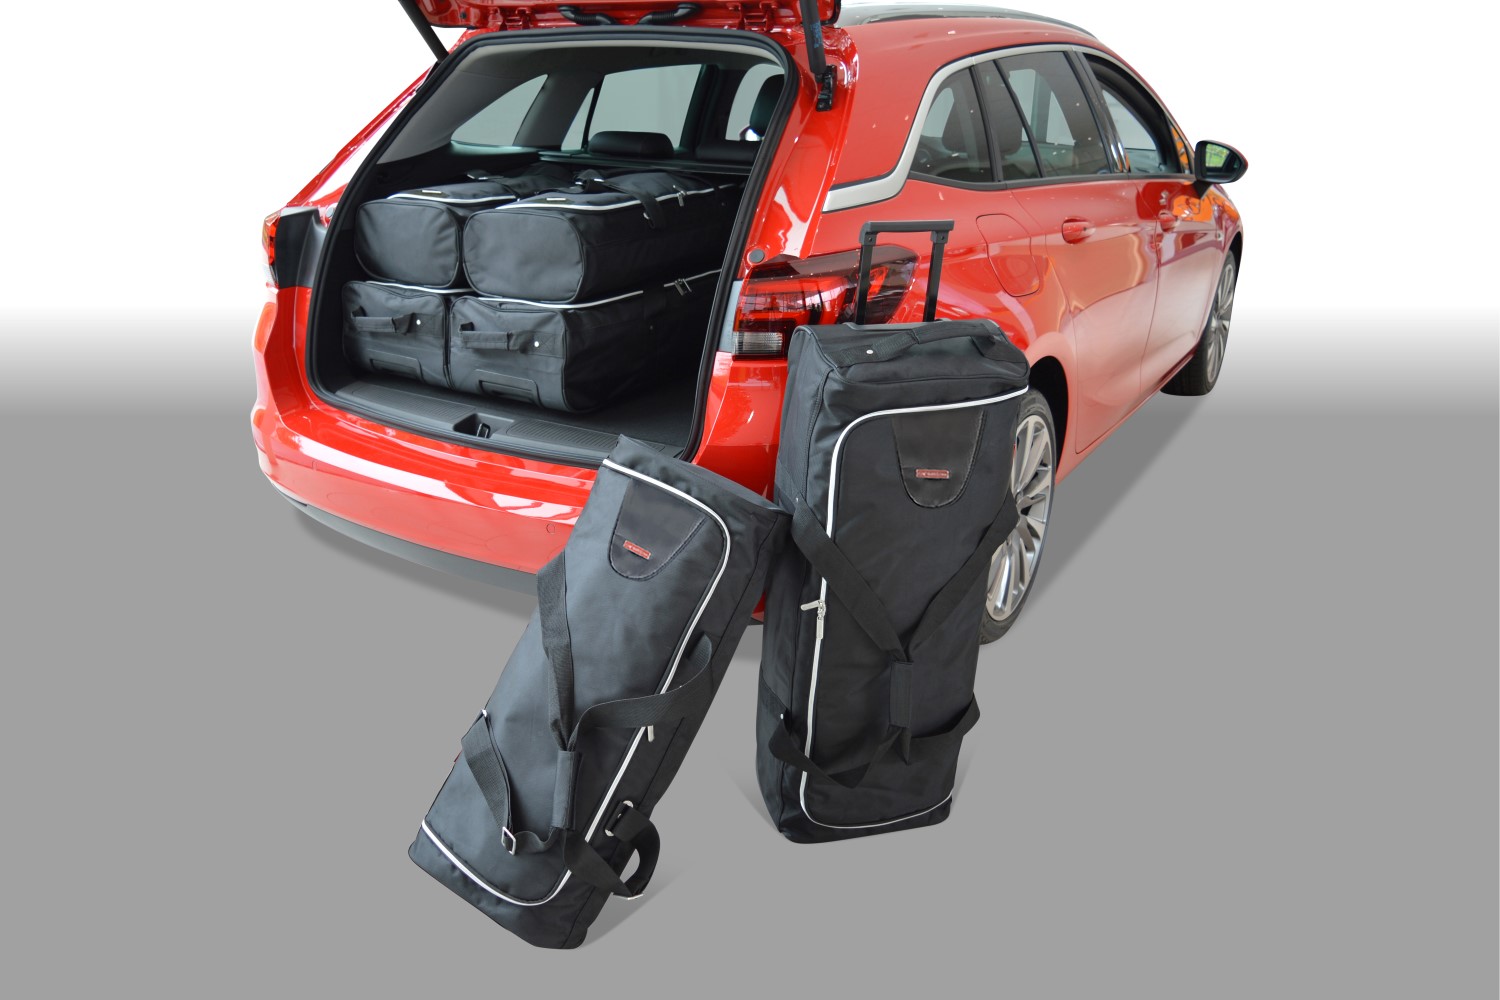 https://www.car-bags.com/images/stories/virtuemart/product/o11301s-opel-astra-sports-tourer-2016-car-bags-1.jpg